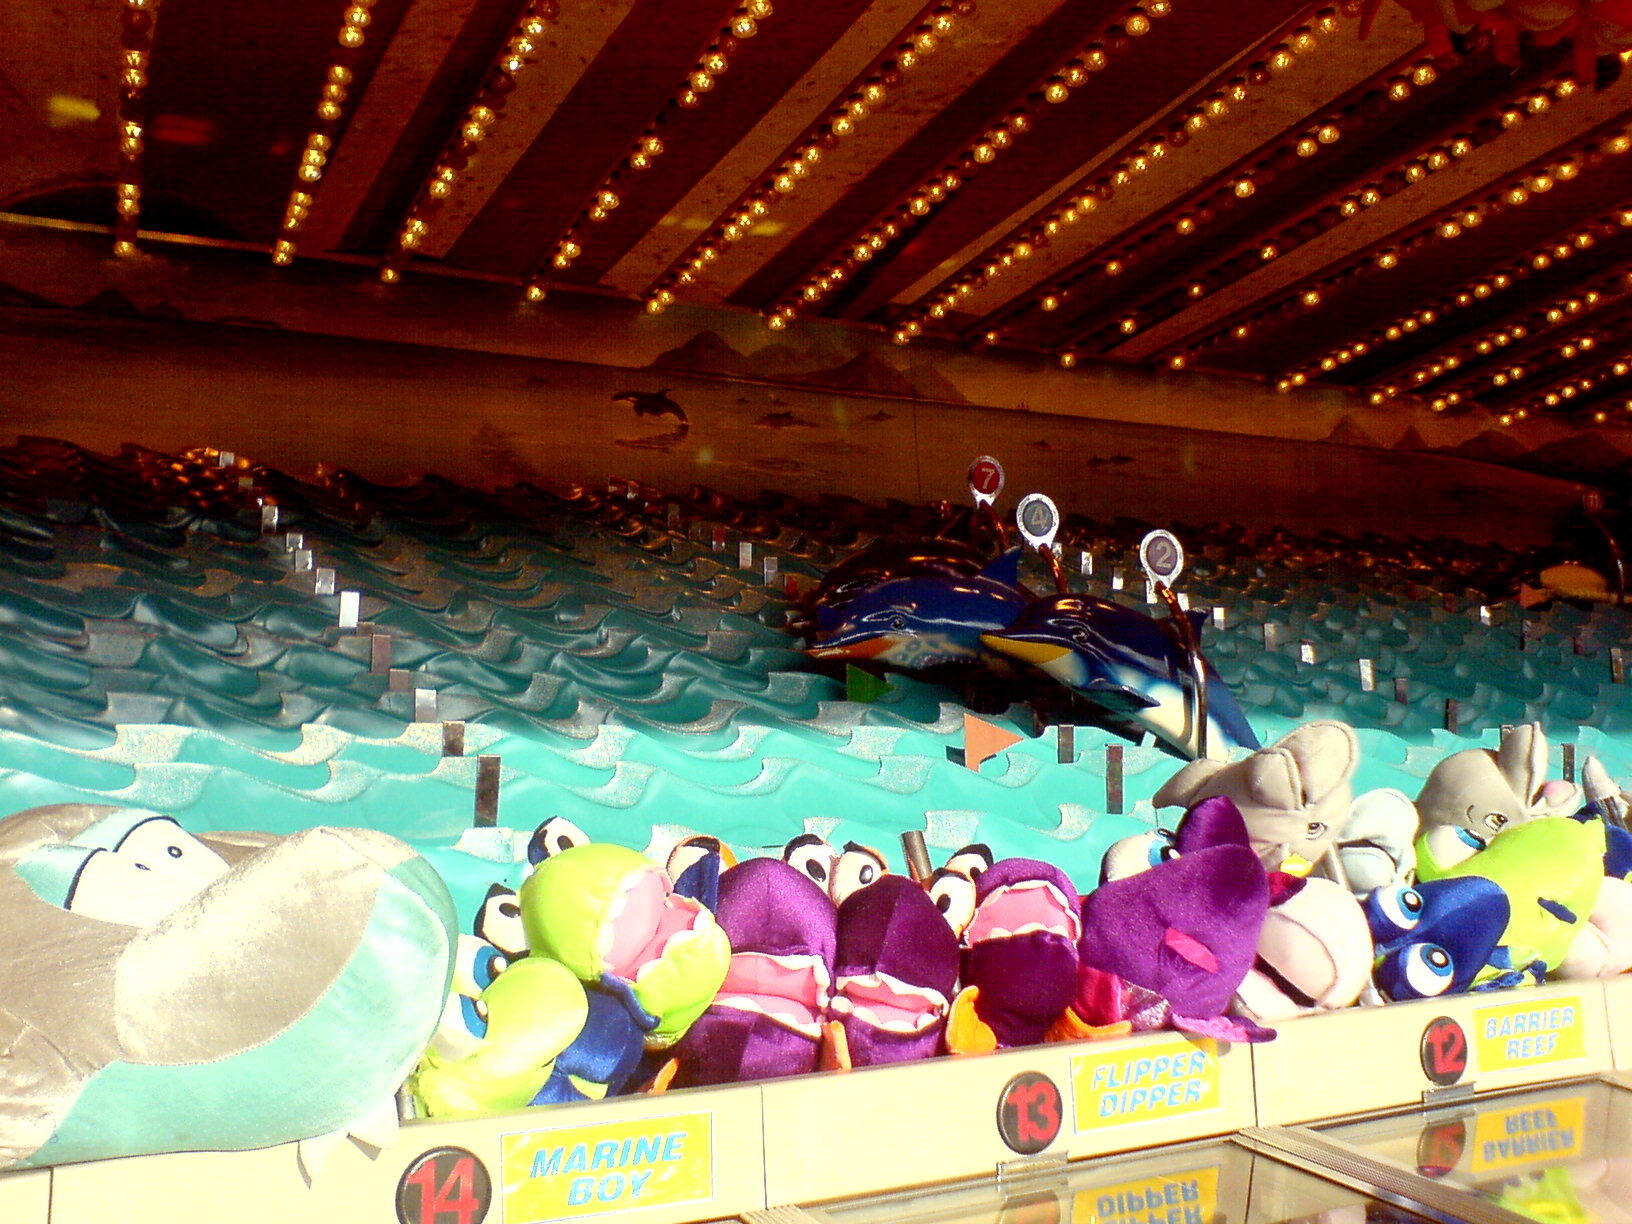 an assortment of stuffed animals in the water at a fair